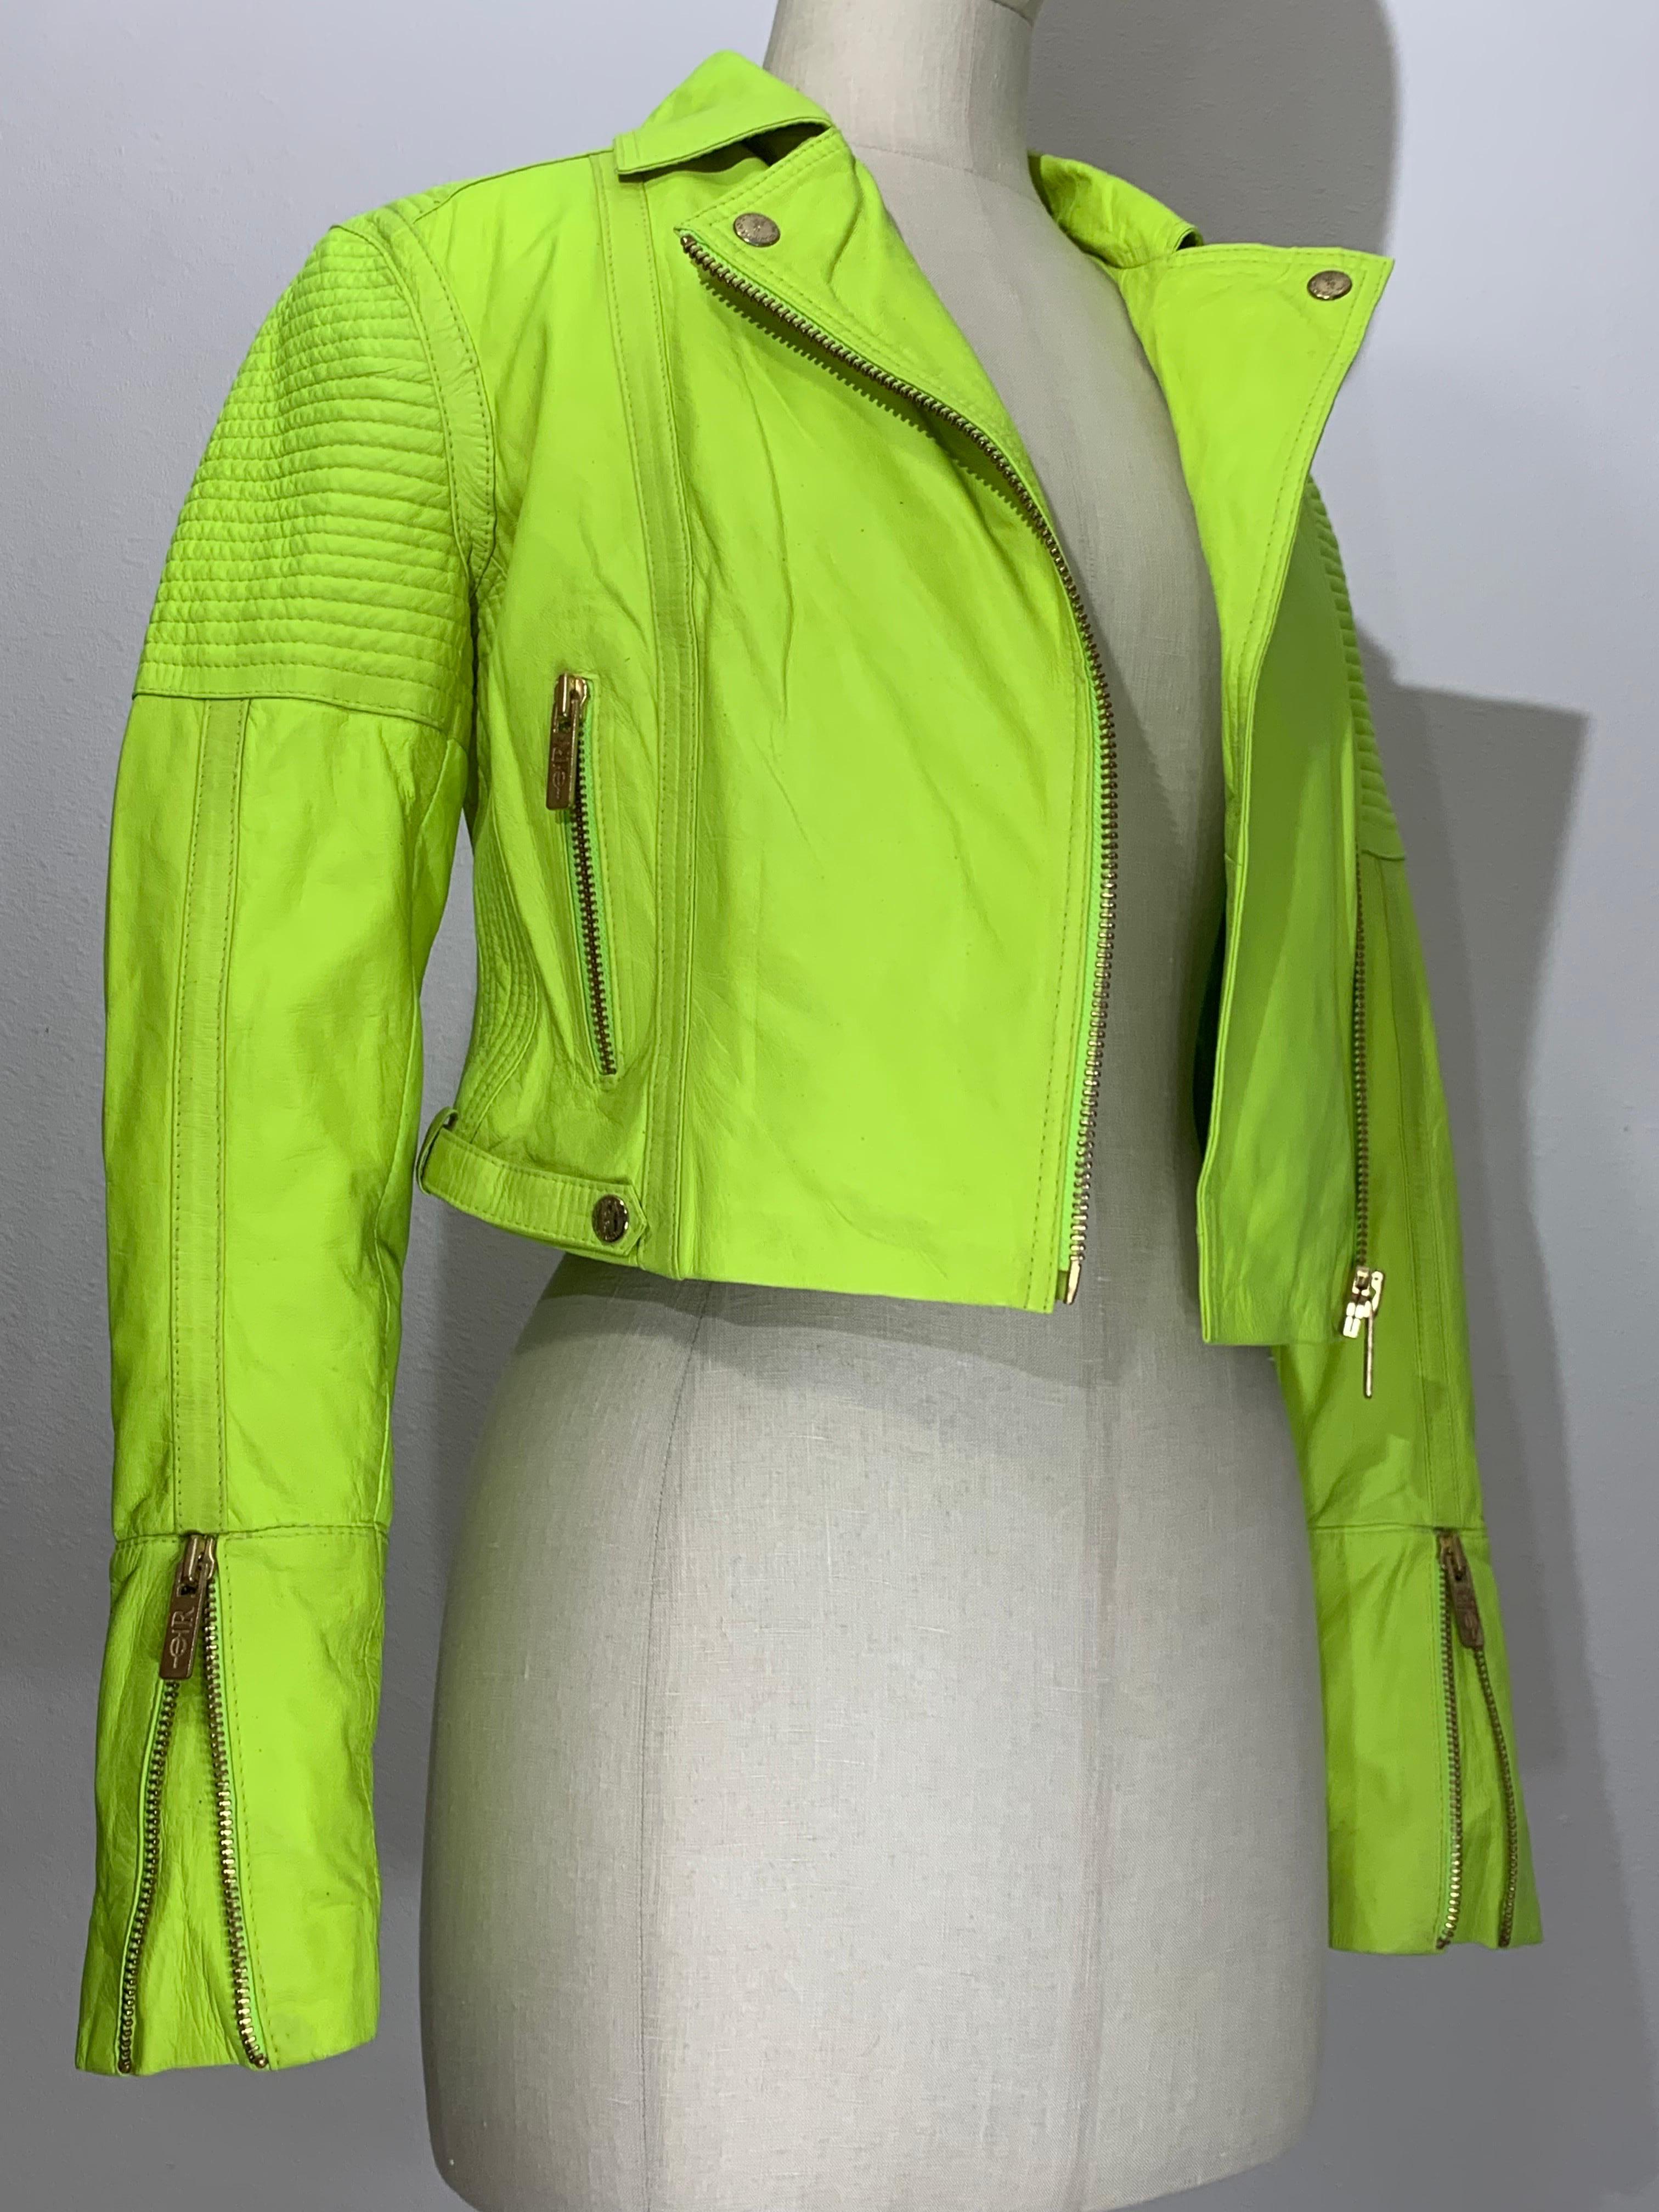 Neon Green Leather Cropped Motorcycle-Style Jacket w Quilted Shoulders & Zippers:  Asymmetrical zipper closure, zippered front slash pocket and zippered tapering sleeves. Shoulder sections are quilted for a 